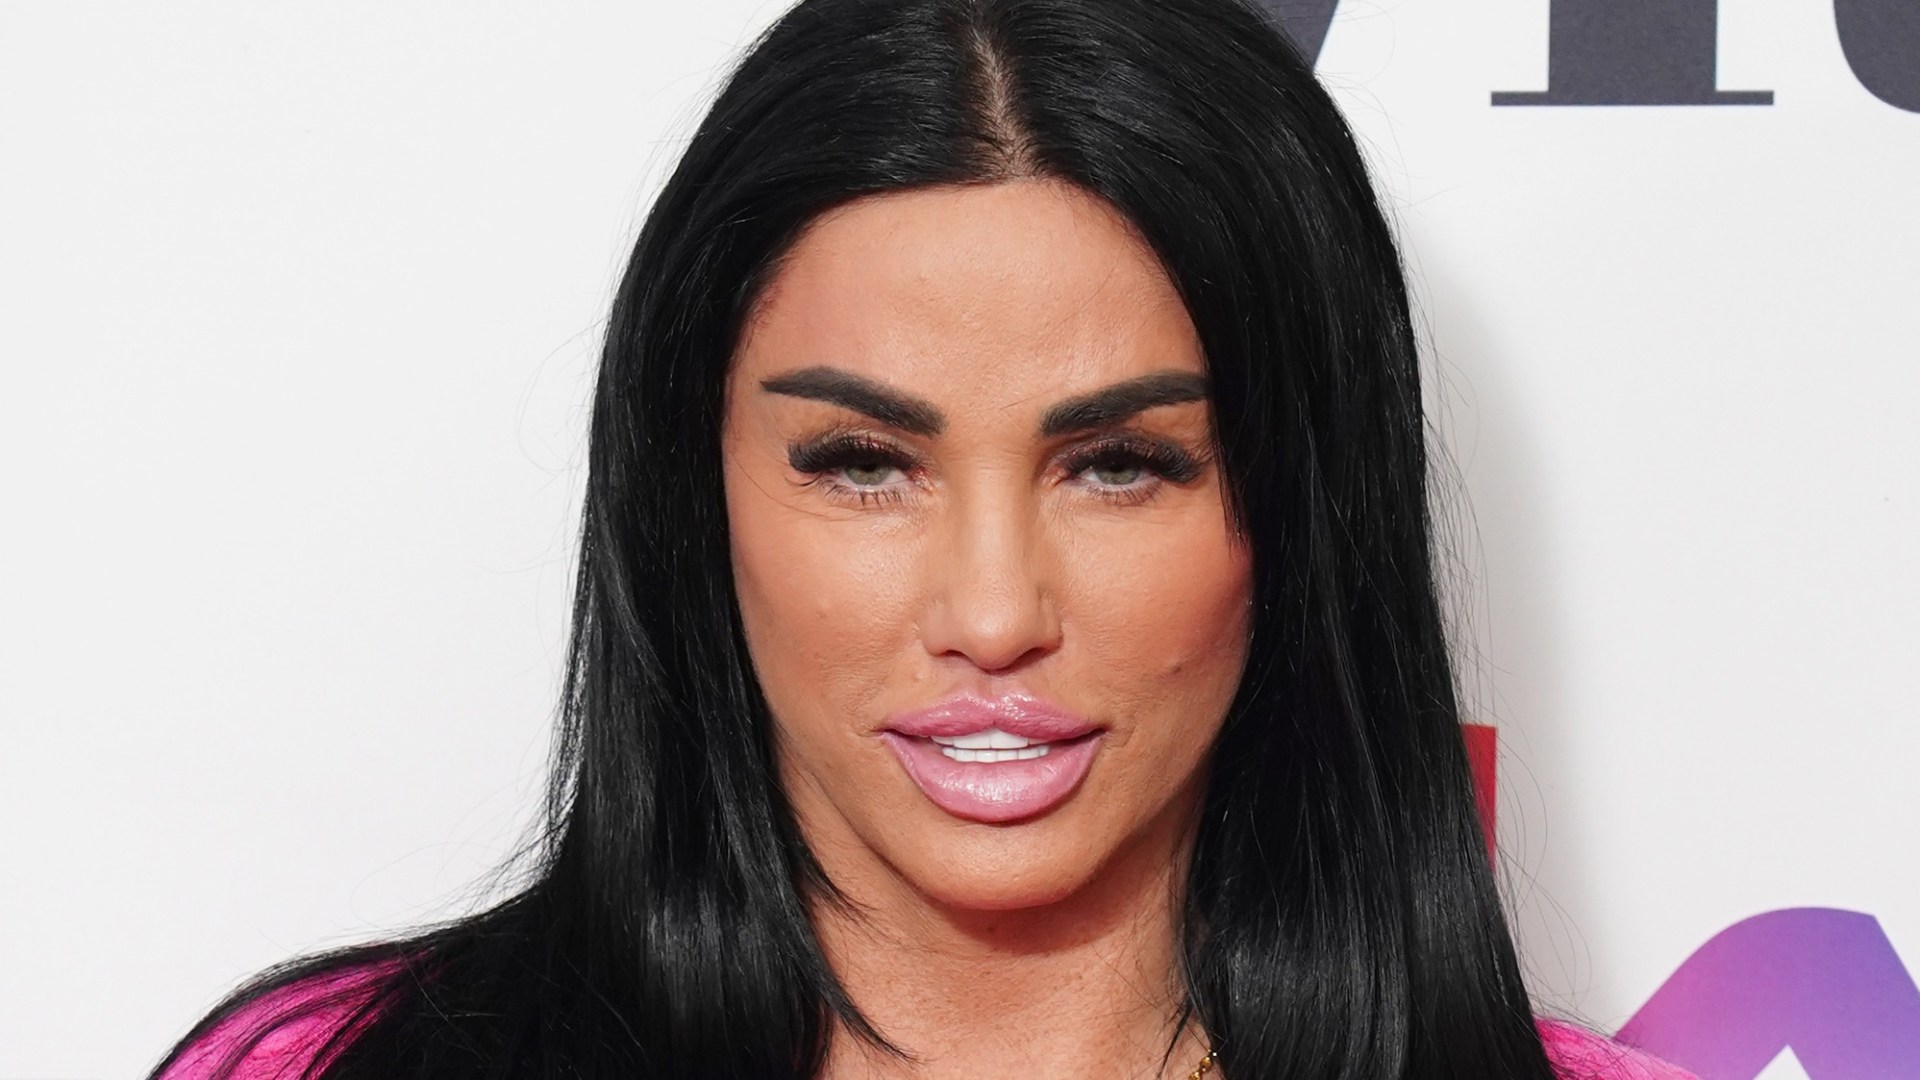 I am stressed admits Katie Price – as she reveals real reason she WONT attend bankruptcy court despite threat of jail [Video]